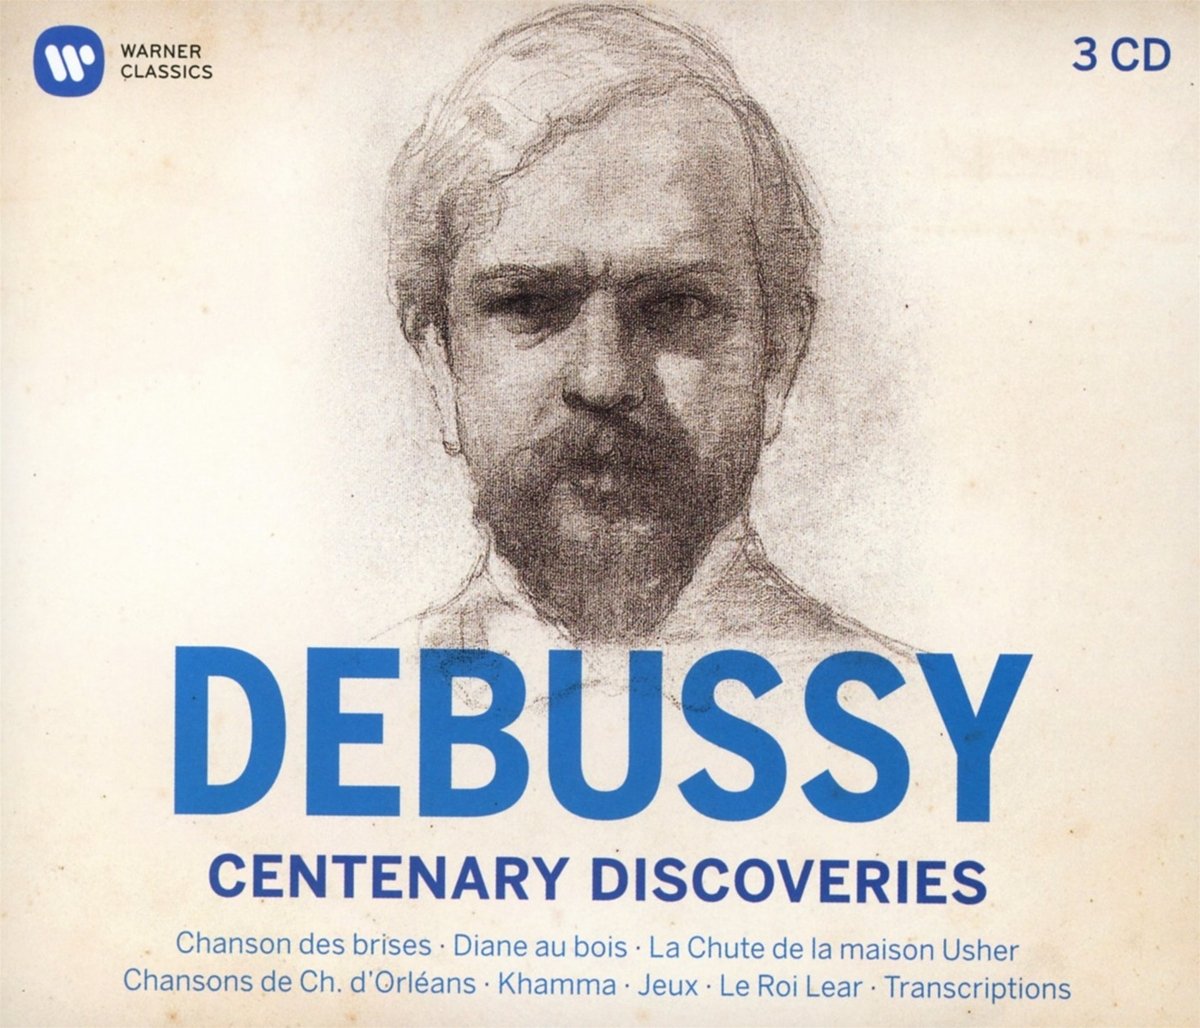 DEBUSSY: CENTENARY DISCOVERIES (3 CDS)